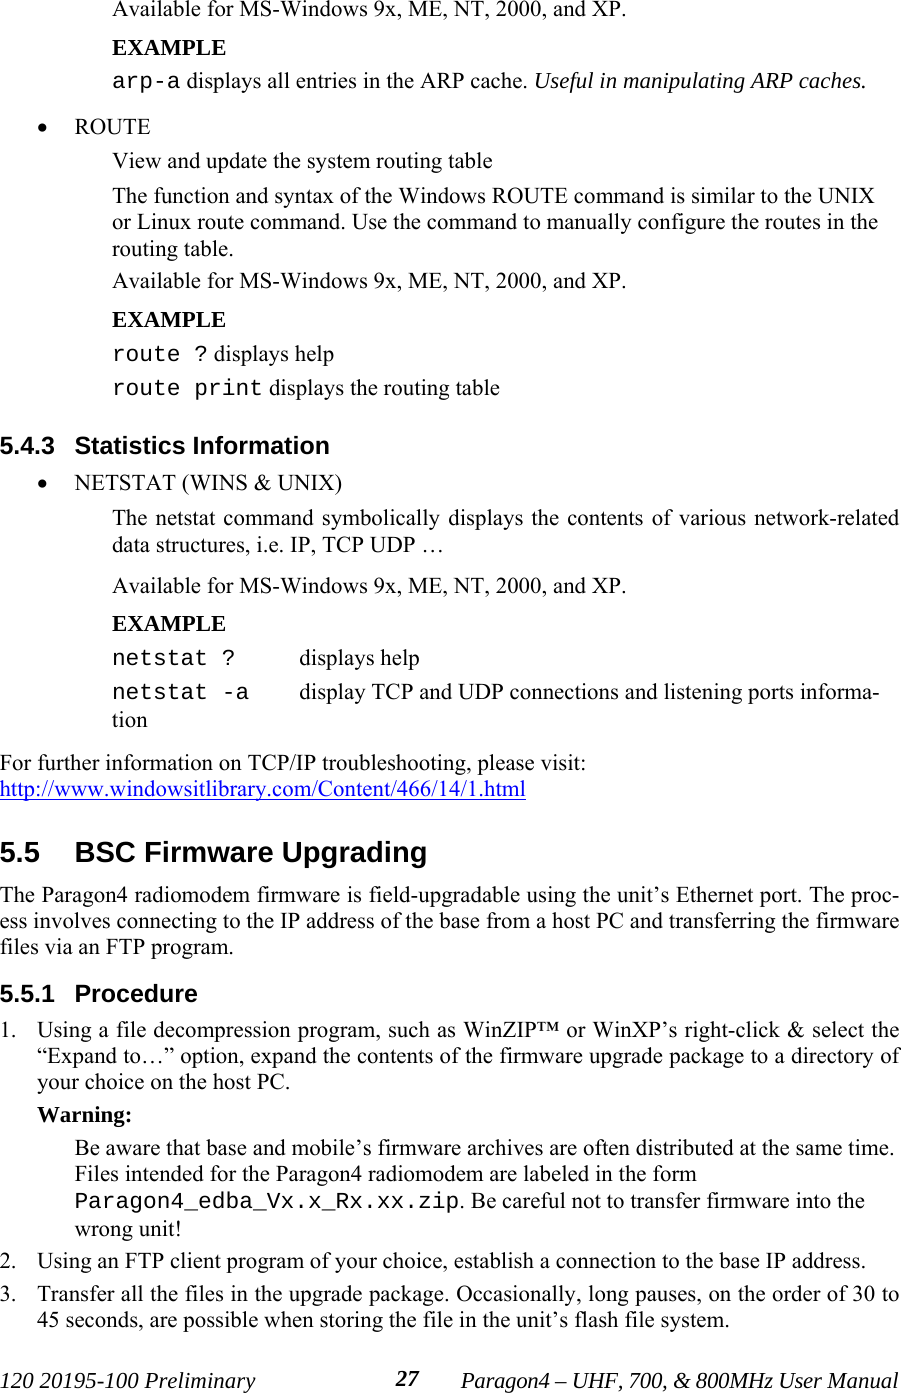 120 20195-100 Preliminary Paragon4 – UHF, 700, &amp; 800MHz User Manual27Available for MS-Windows 9x, ME, NT, 2000, and XP.EXAMPLEarp-a displays all entries in the ARP cache. Useful in manipulating ARP caches.• ROUTE View and update the system routing tableThe function and syntax of the Windows ROUTE command is similar to the UNIXor Linux route command. Use the command to manually configure the routes in therouting table.Available for MS-Windows 9x, ME, NT, 2000, and XP.EXAMPLE route ? displays helproute print displays the routing table 5.4.3  Statistics Information• NETSTAT (WINS &amp; UNIX) The netstat command symbolically displays the contents of various network-relateddata structures, i.e. IP, TCP UDP …Available for MS-Windows 9x, ME, NT, 2000, and XP.EXAMPLE netstat ? displays helpnetstat -a  display TCP and UDP connections and listening ports informa-tion For further information on TCP/IP troubleshooting, please visit:http://www.windowsitlibrary.com/Content/466/14/1.html5.5  BSC Firmware UpgradingThe Paragon4 radiomodem firmware is field-upgradable using the unit’s Ethernet port. The proc-ess involves connecting to the IP address of the base from a host PC and transferring the firmwarefiles via an FTP program. 5.5.1  Procedure1. Using a file decompression program, such as WinZIP™ or WinXP’s right-click &amp; select the“Expand to…” option, expand the contents of the firmware upgrade package to a directory ofyour choice on the host PC.Warning:Be aware that base and mobile’s firmware archives are often distributed at the same time.Files intended for the Paragon4 radiomodem are labeled in the formParagon4_edba_Vx.x_Rx.xx.zip. Be careful not to transfer firmware into thewrong unit! 2. Using an FTP client program of your choice, establish a connection to the base IP address.3. Transfer all the files in the upgrade package. Occasionally, long pauses, on the order of 30 to45 seconds, are possible when storing the file in the unit’s flash file system.